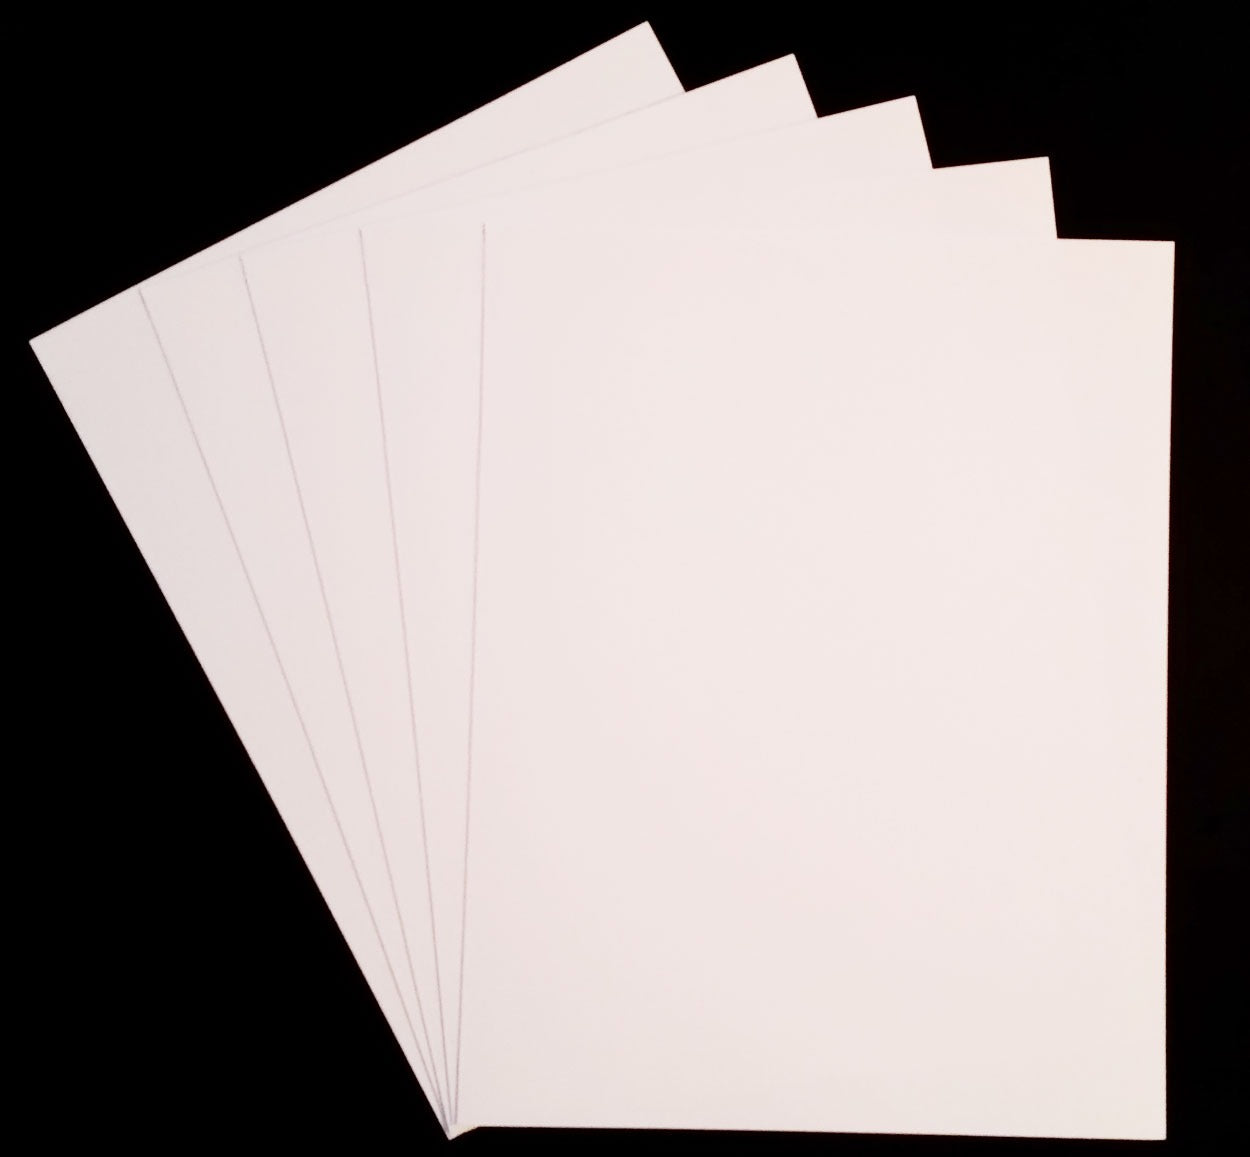 11 X 17, 50 sheets/box, Fine Art Dual-Sided Paper, 330 gsm